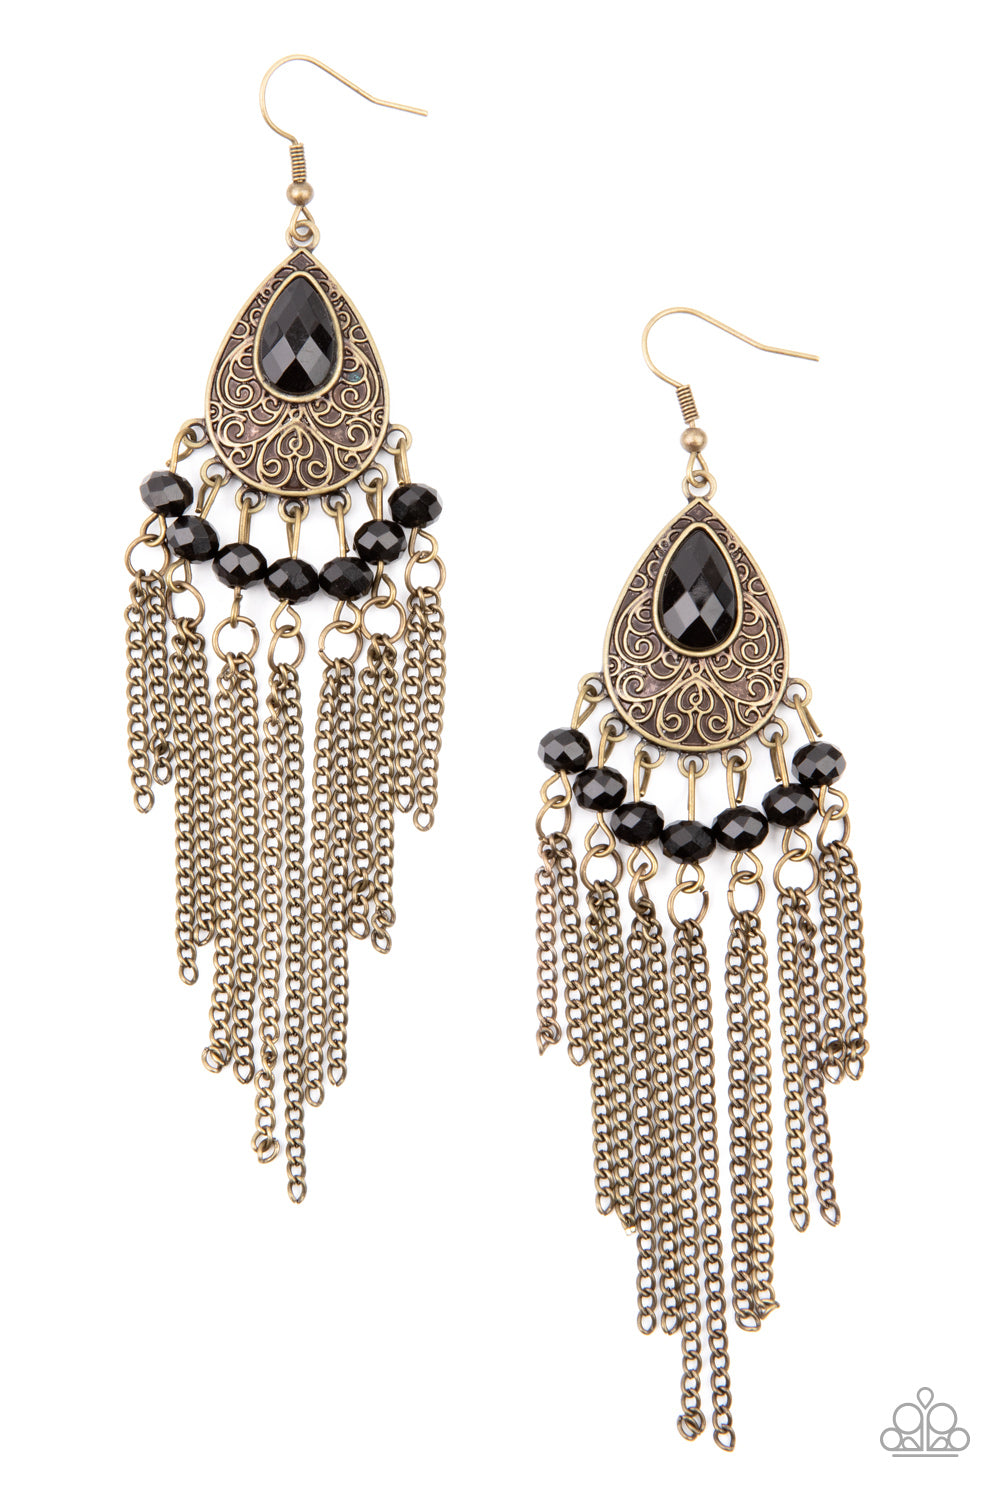 Paparazzi Accessories Floating on HEIR - Brass Earrings - Lady T Accessories